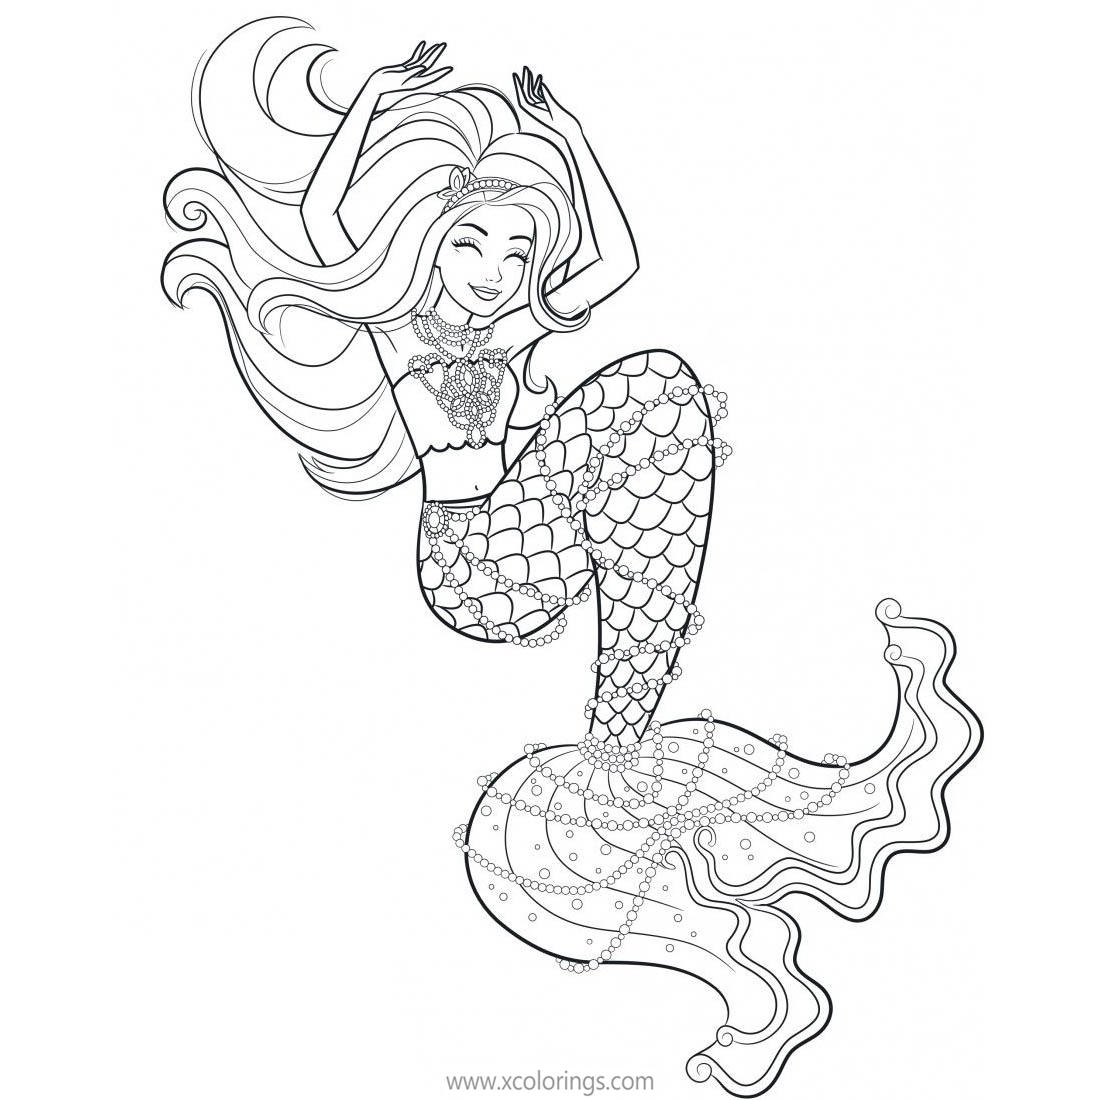 Barbie Mermaid Characters Coloring Pages - XColorings.com